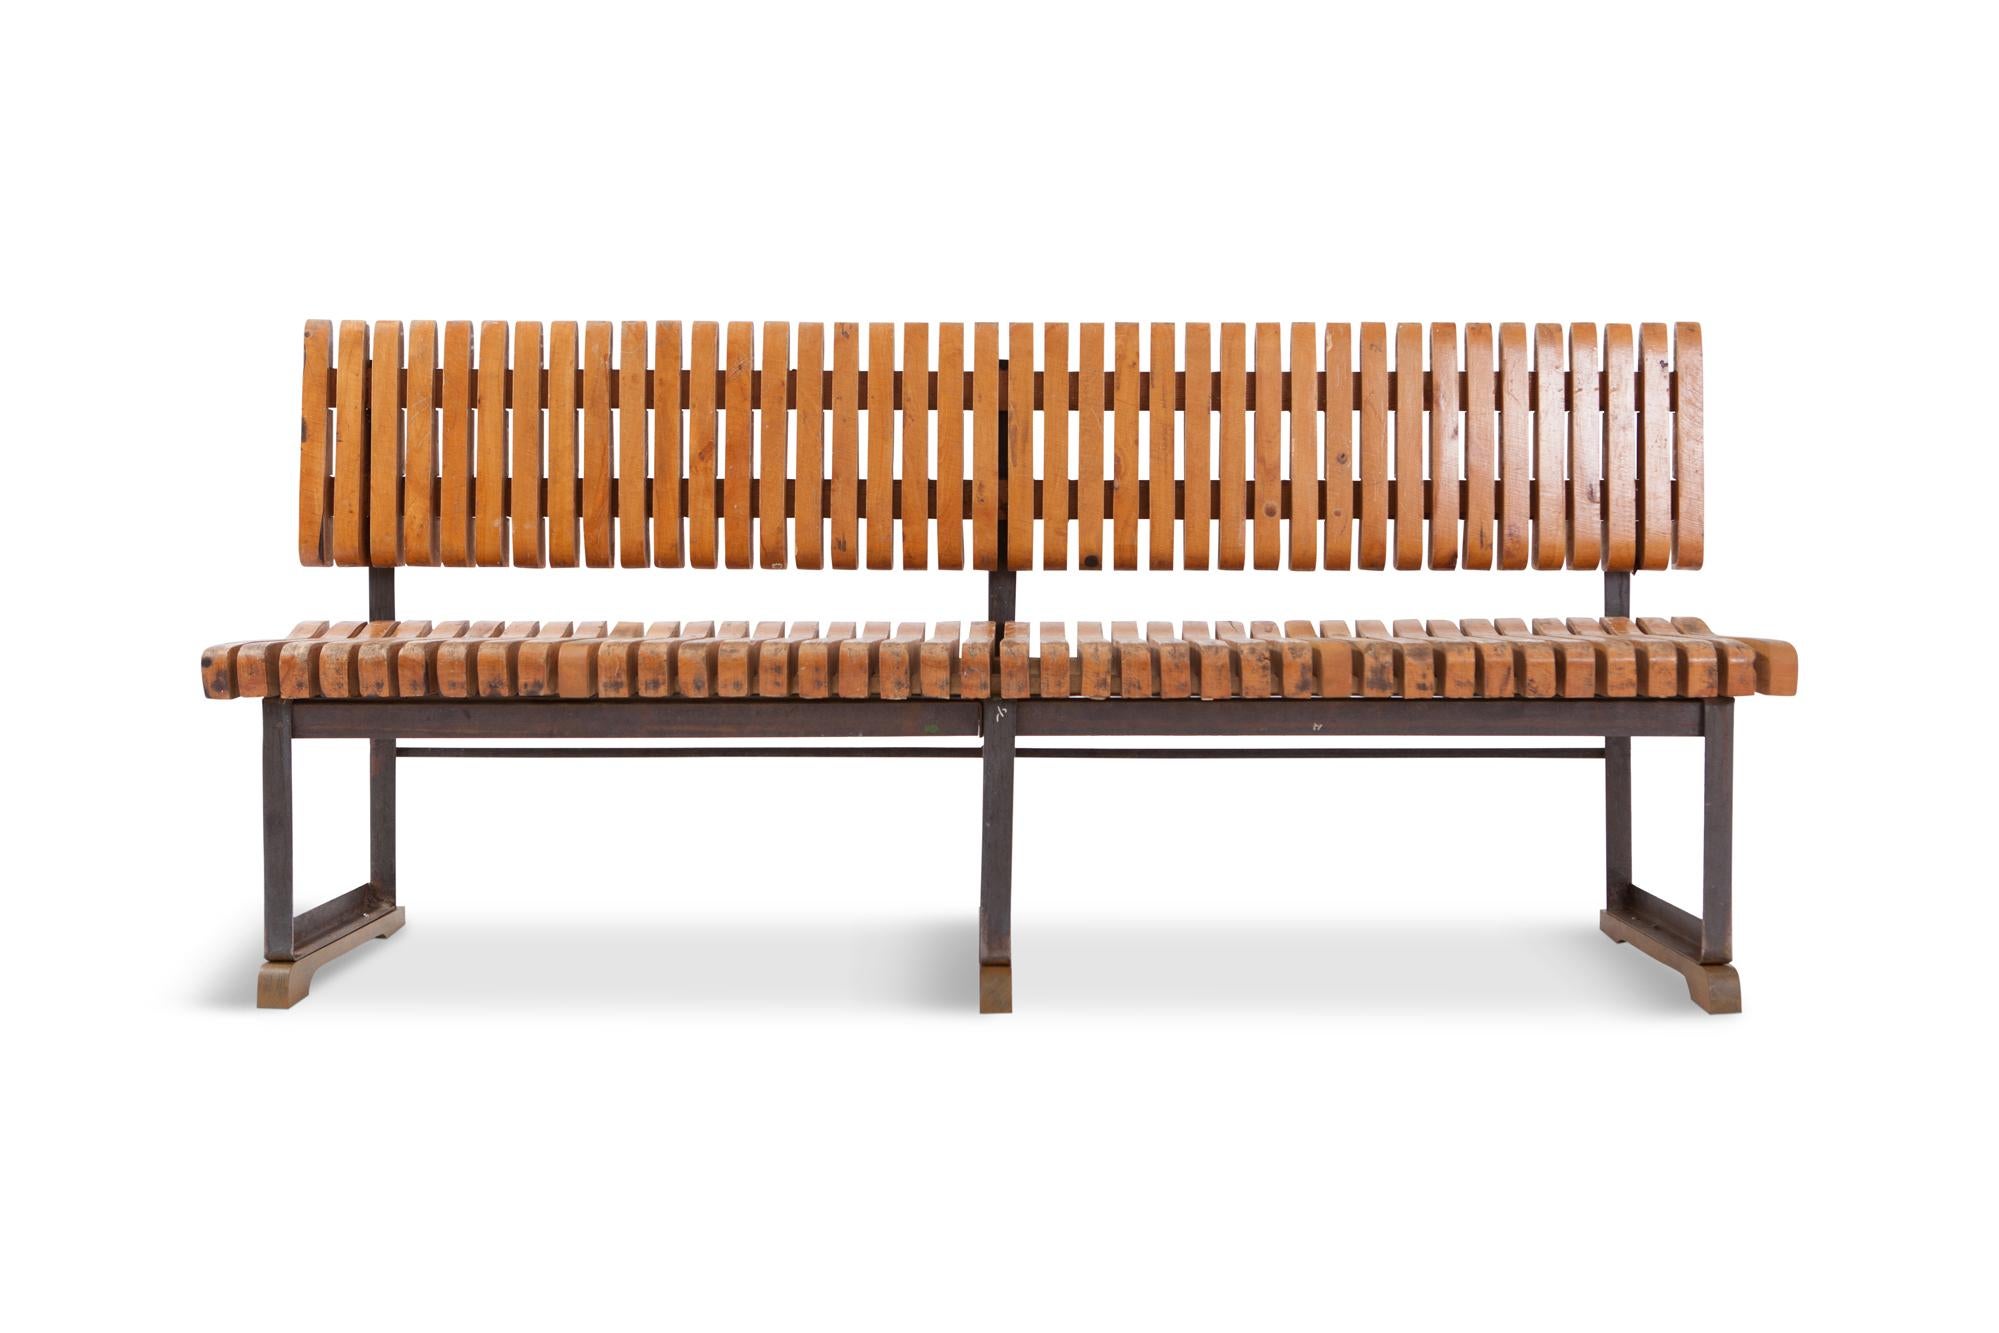 Slatted bench in solid pine with a black lacquered steel frame. The bench show multiple marks of wear consistent with age and use, giving it a lot of character and a very robust and impressive appearance. A true eye-catcher.

Measures: W 197.5, D